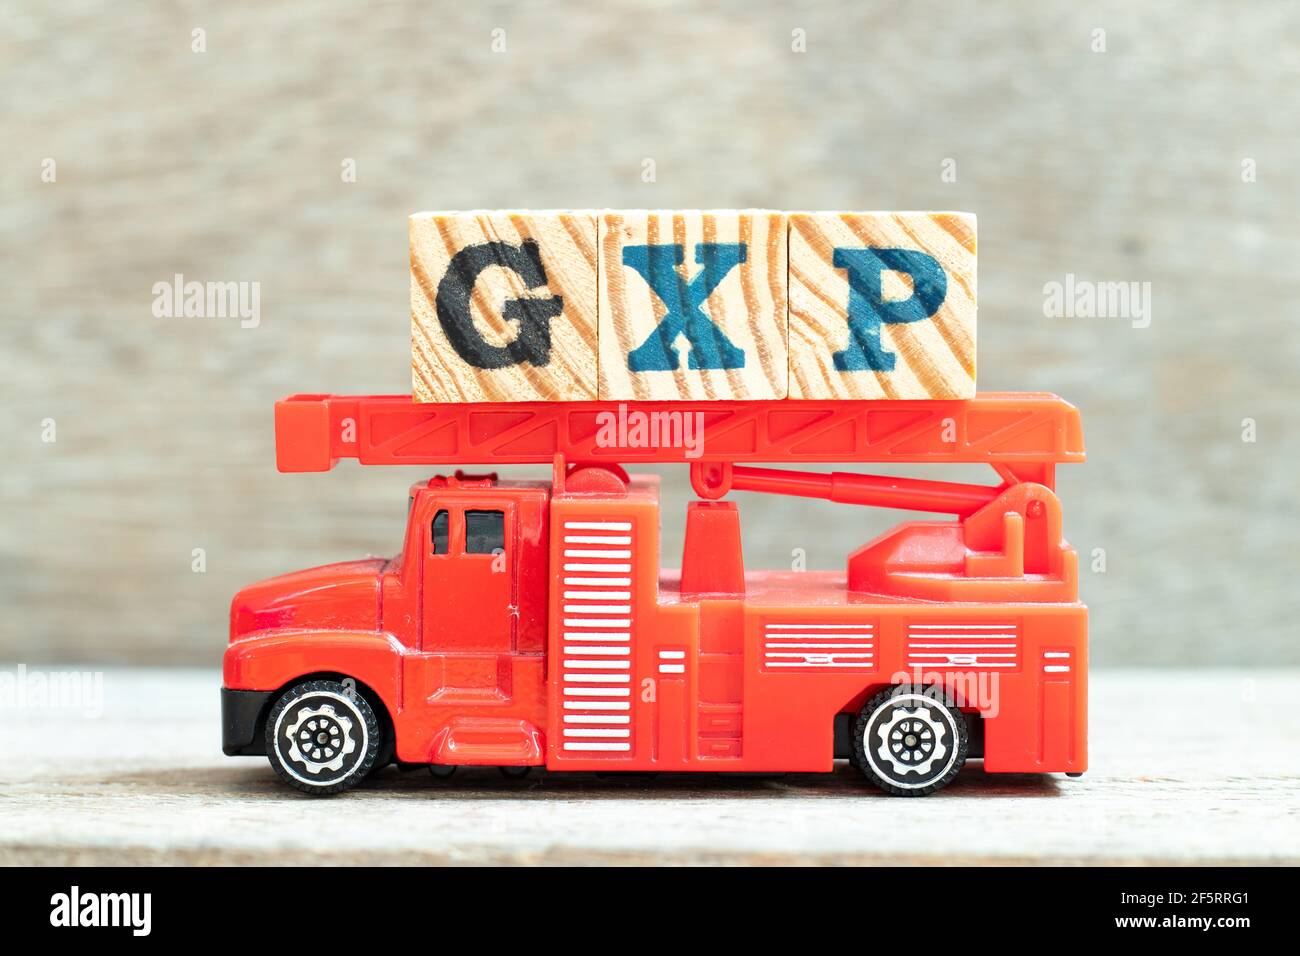 Fire ladder truck hold letter block in word GXP on wood background Stock Photo